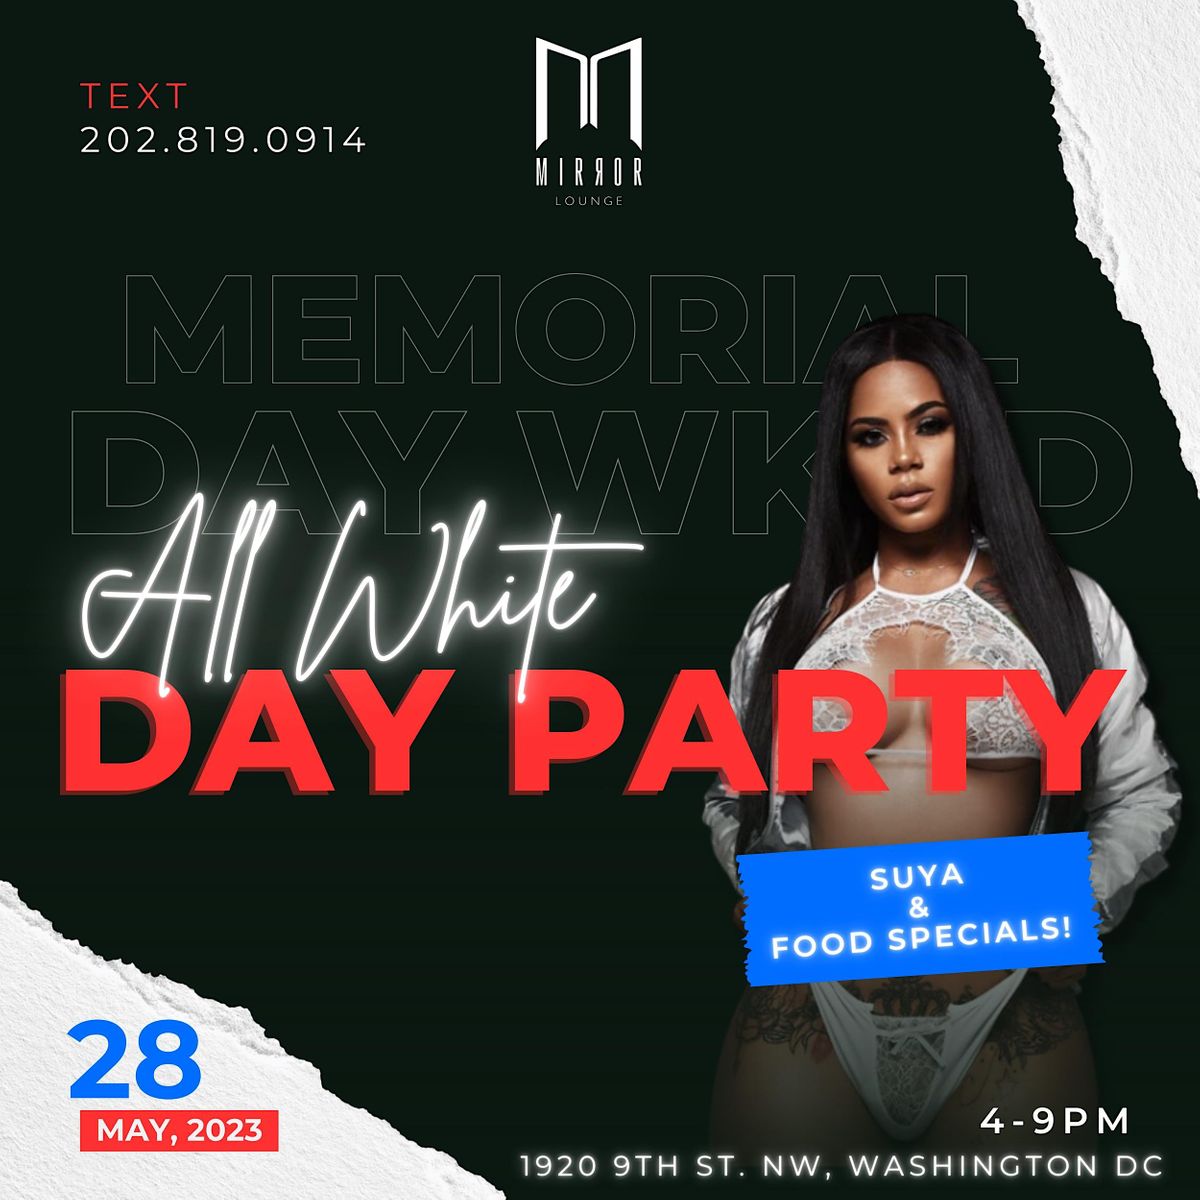 All White Day Party Memorial Day Weekend